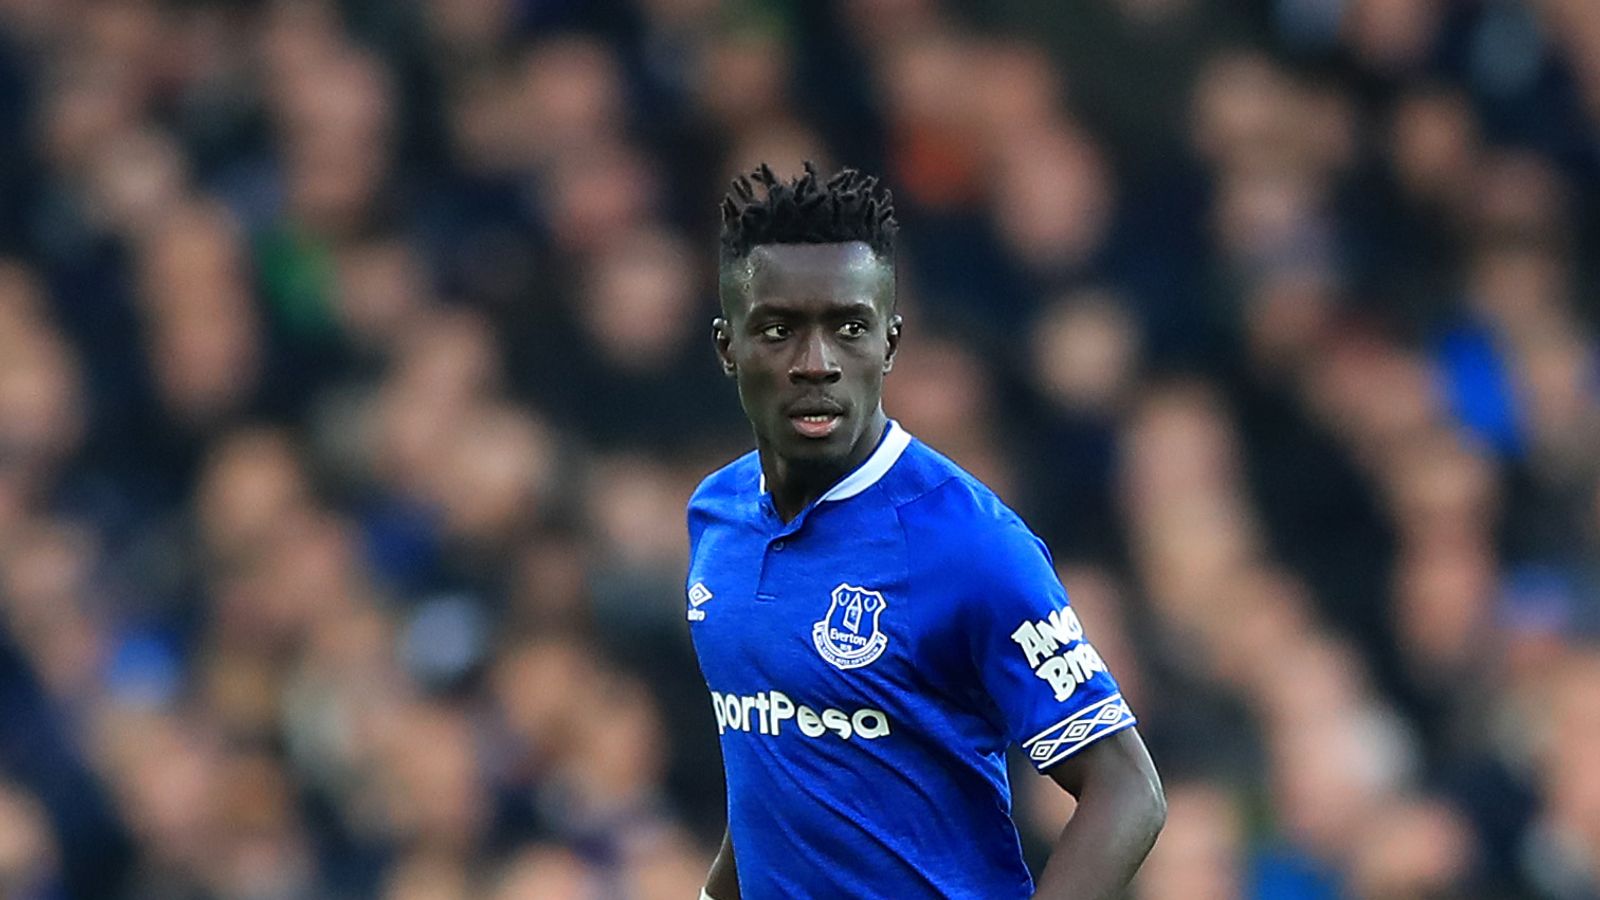 Idrissa Gueye Age, Salary, Net worth, Current Teams, Career, Height, and much more